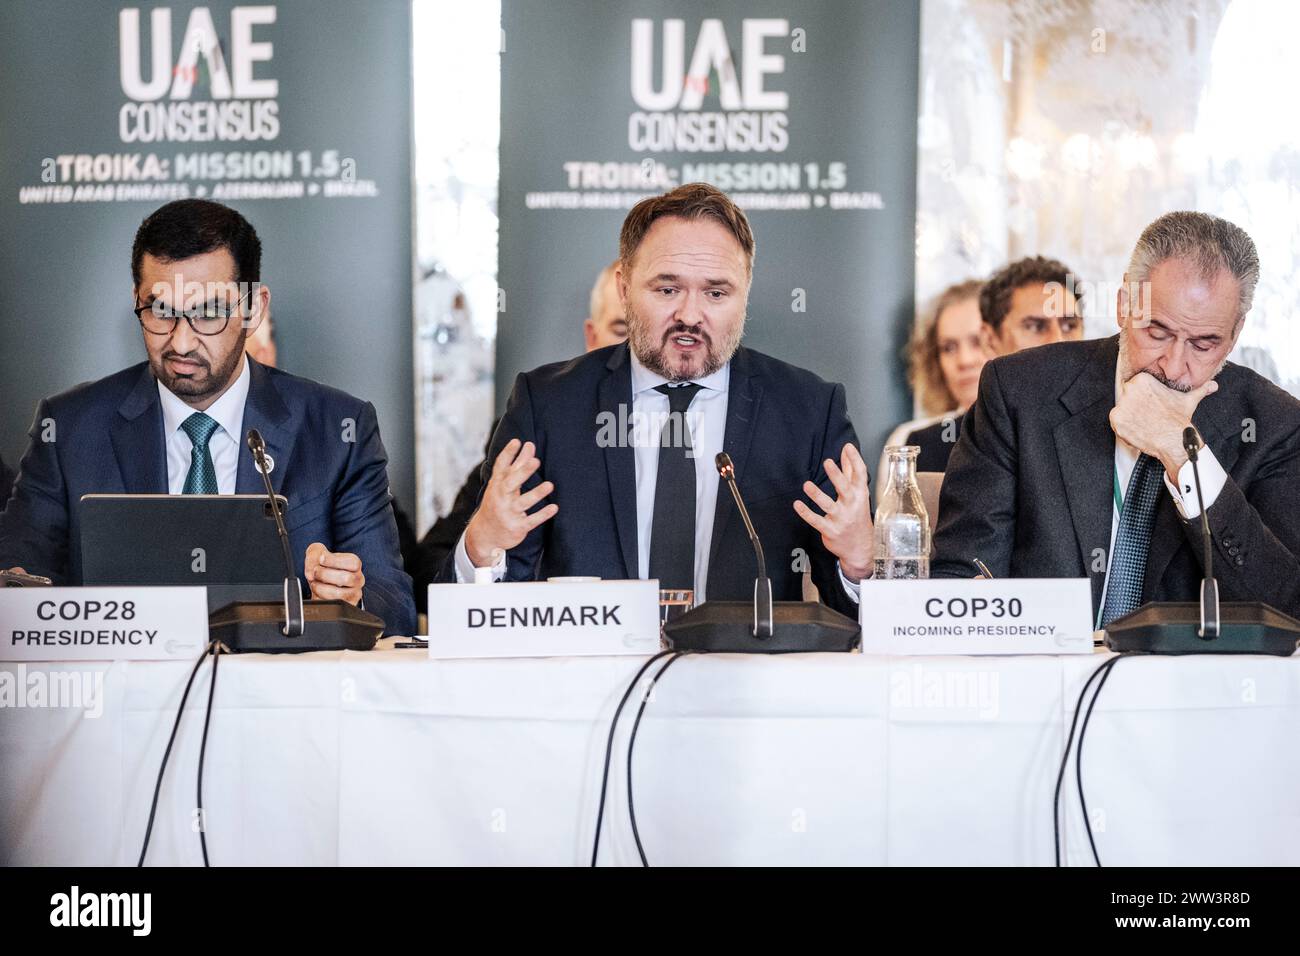 From left: Sultan Ahmed Al Jaber, Minister for global climate policy Dan Joergensen (S), and upcoming COP30 chairman André Aranha Corrêa do Lago. Climate ministers meet at Marienlyst Strandhotel in Helsingoer on Thursday, March 21. Denmark is again this year host for preliminary discussions ahead of this year's climate summit, COP29, in Azerbaijan in November Thursday, March 21, 2024. (Photo: Thomas Traasdahl/Scanpix 2024) Stock Photo